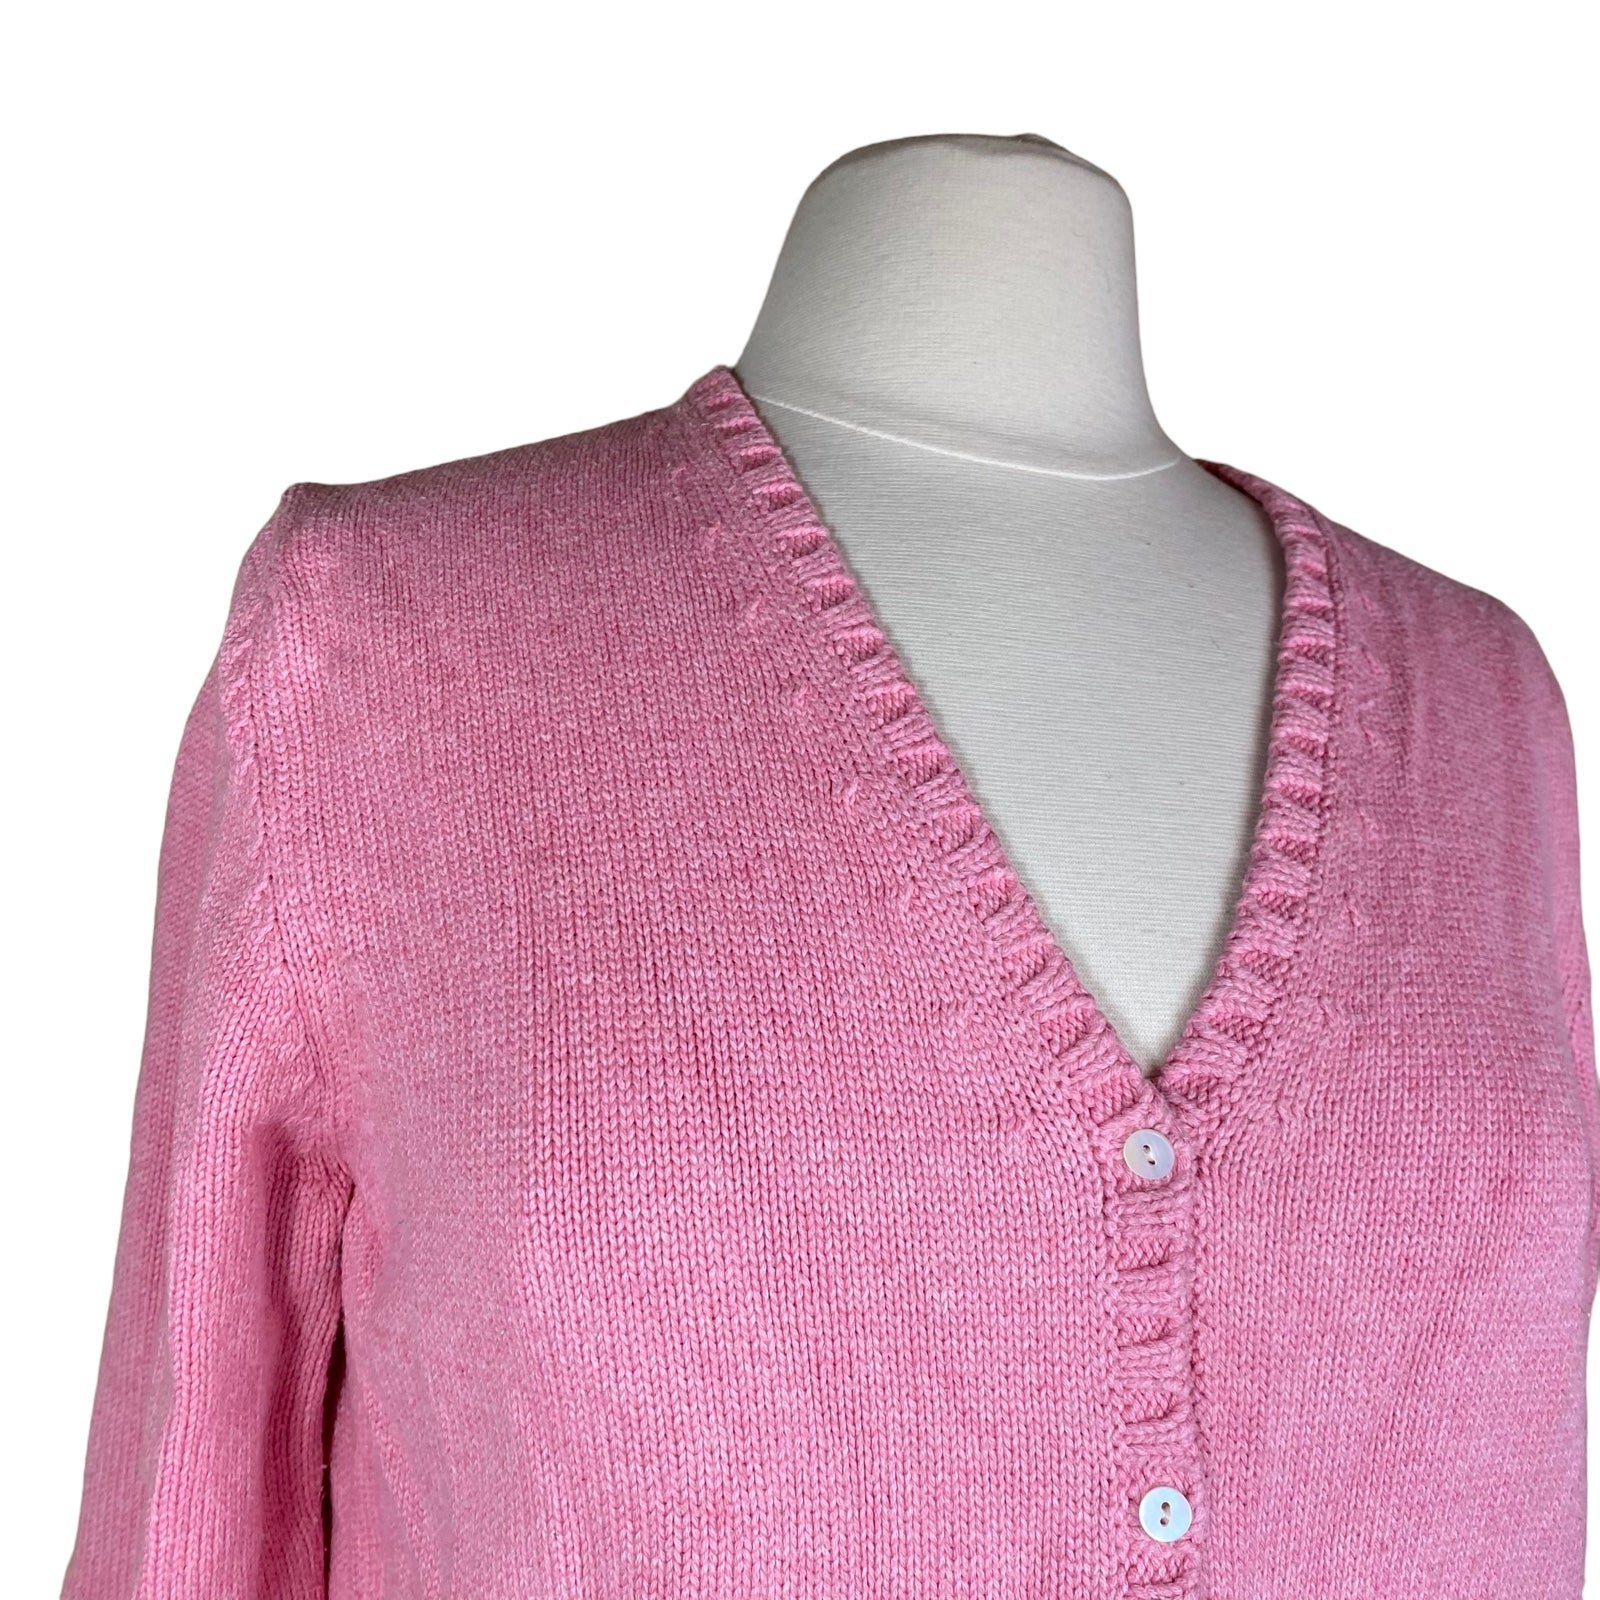 High quality Lands End Cardigan Sweater PINK Barbiecore Cotton Medium 10-12 PcgSjAKlT just for you